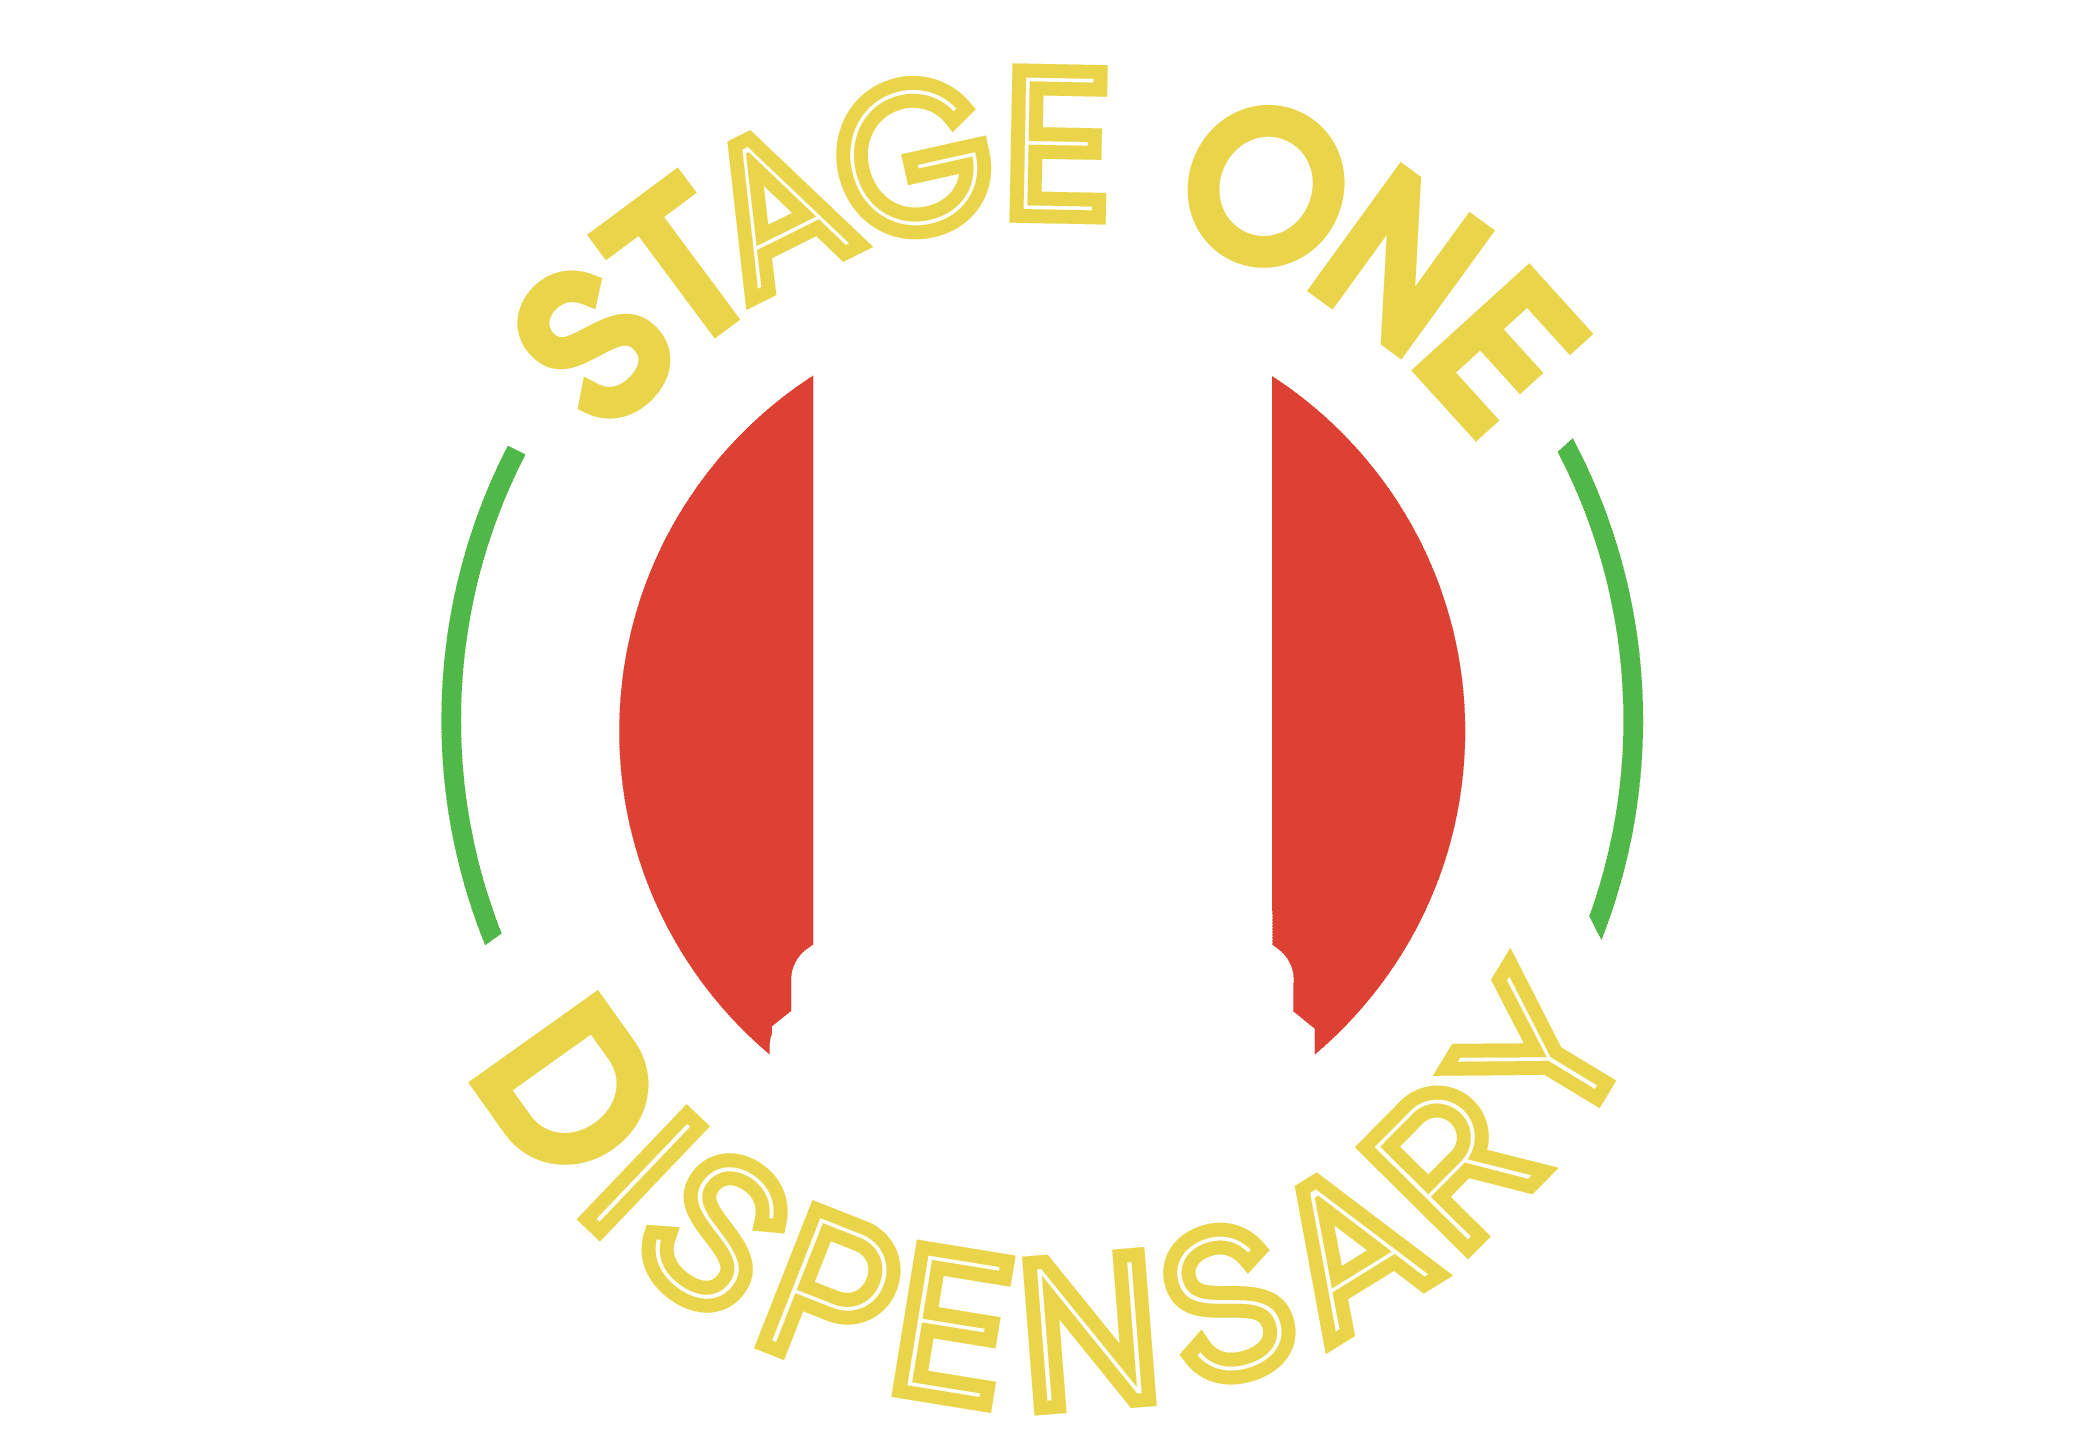 Stage One Dispensary